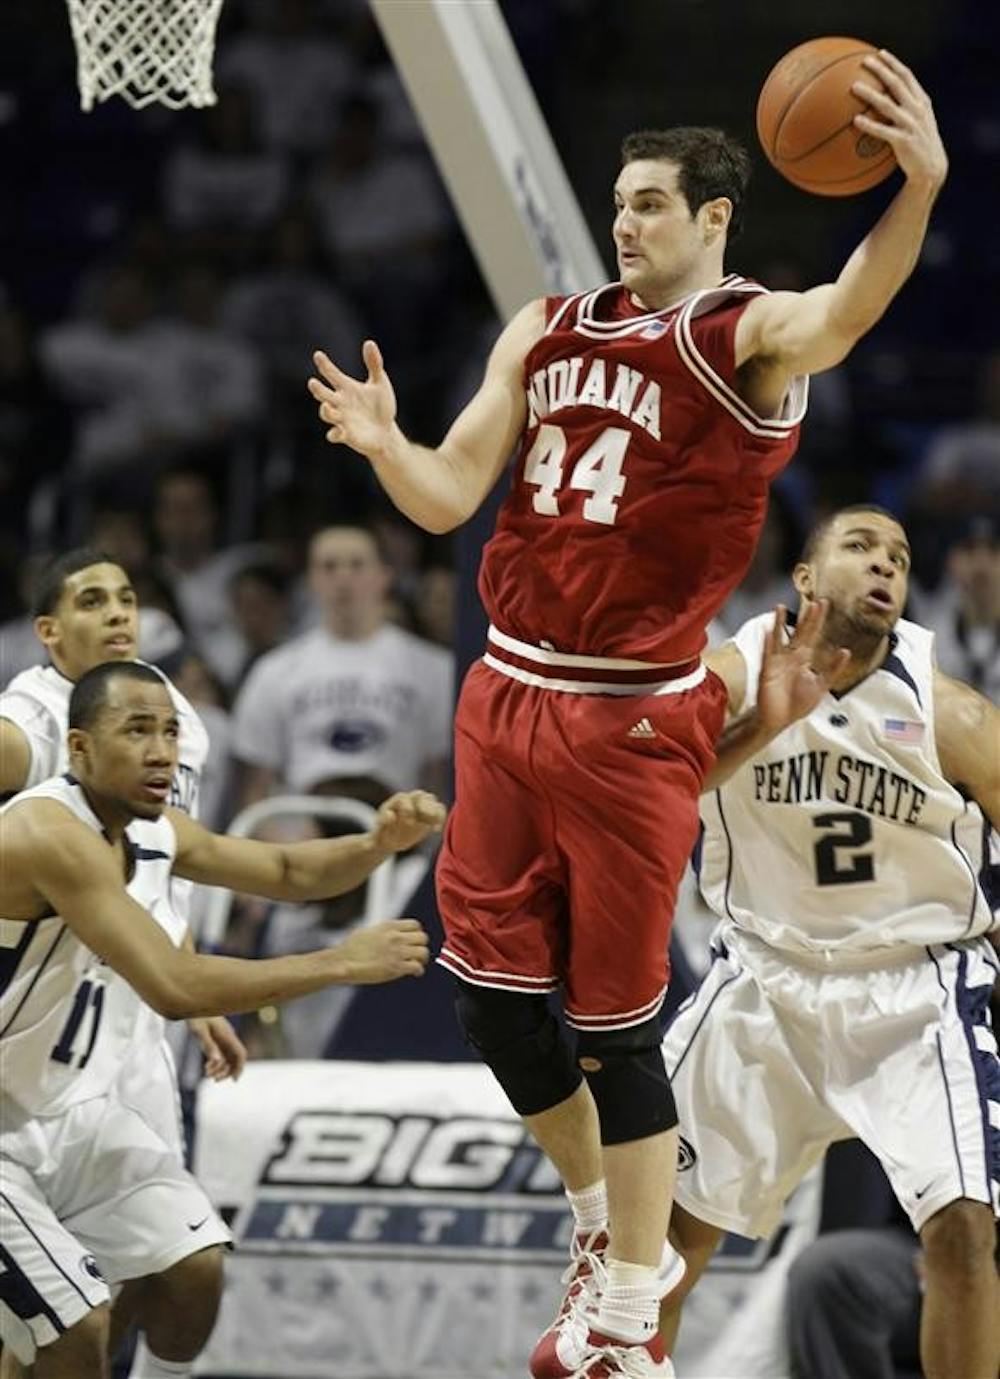 IU senior forward Kyle Taber grabs a rebound away from Penn State's Stanley Pringle, foreground left, and Jamelle Cornley, right, during the second half Saturday in State College, Pa.. Penn State won 61-58.